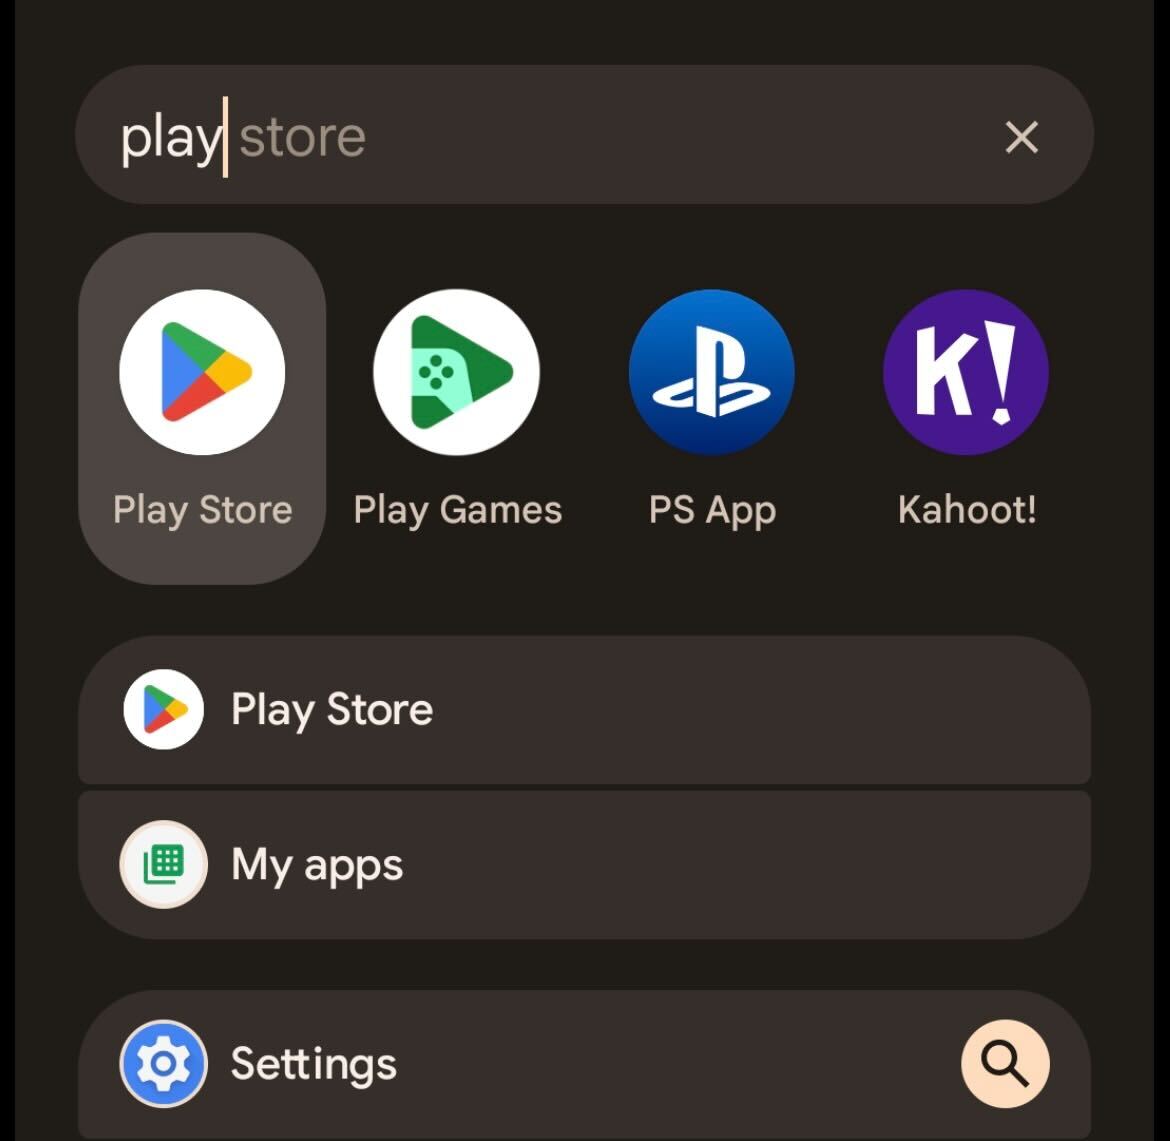 Play Store on Android